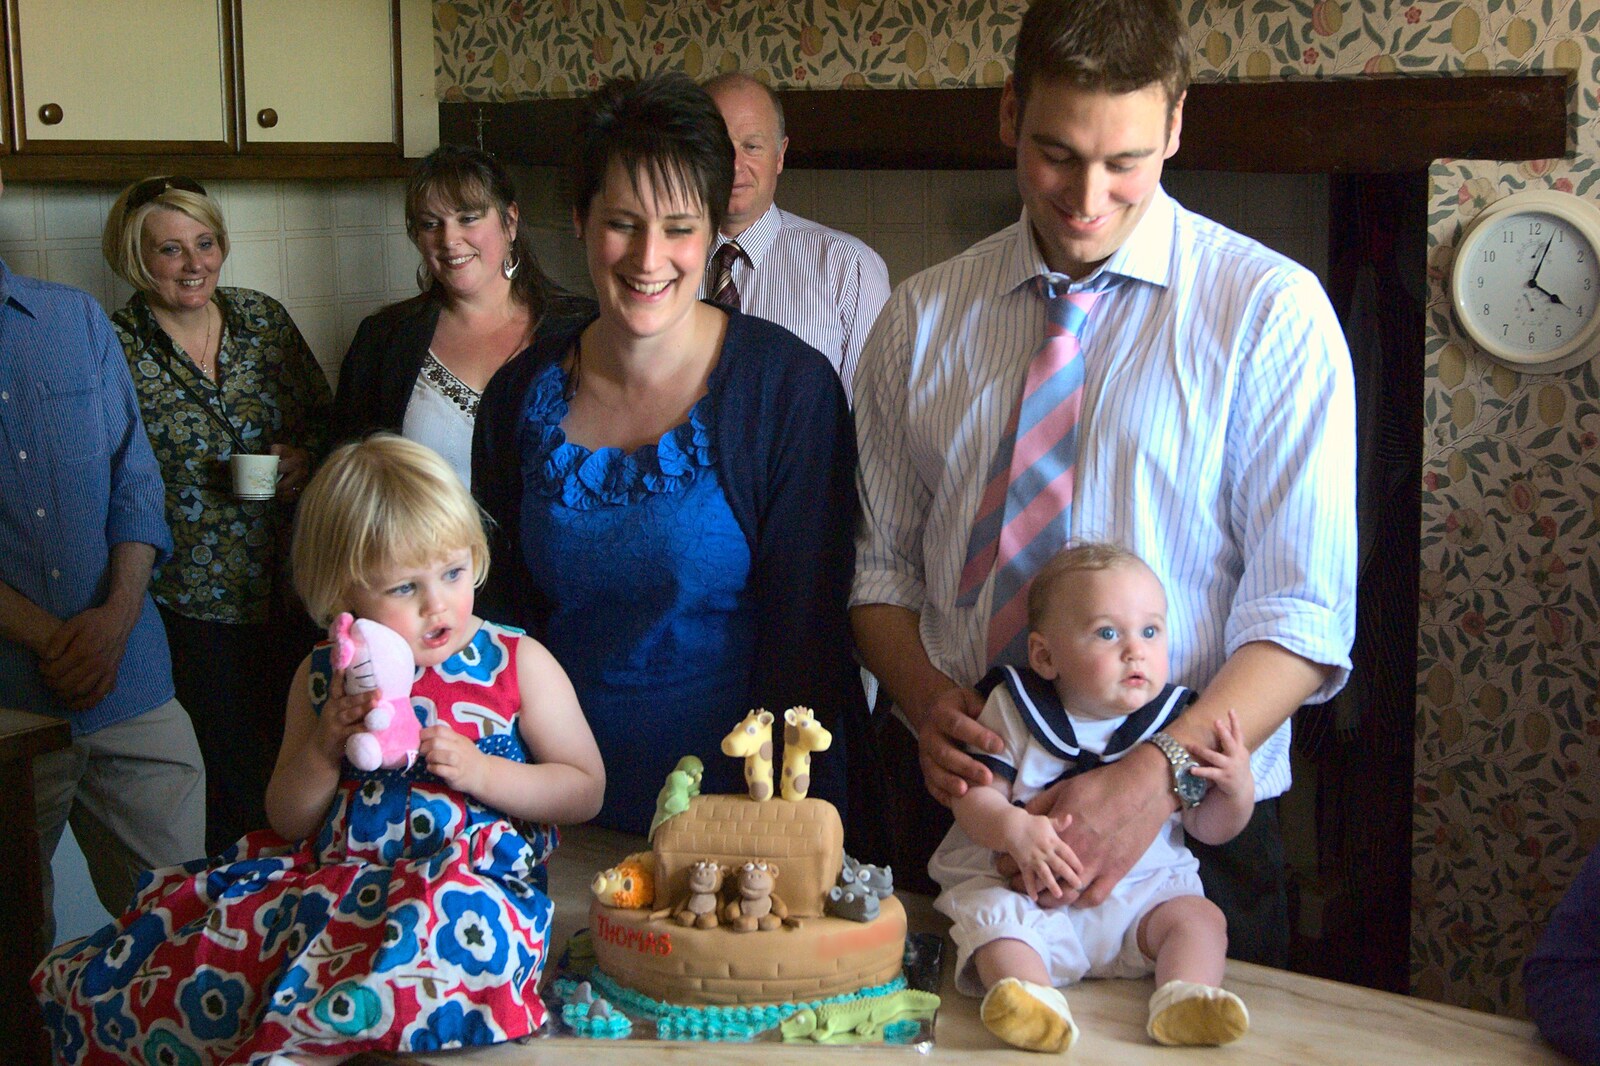 Thomas with his big sis from A Christening, Wilford, Northamptonshire - 22nd May 2011